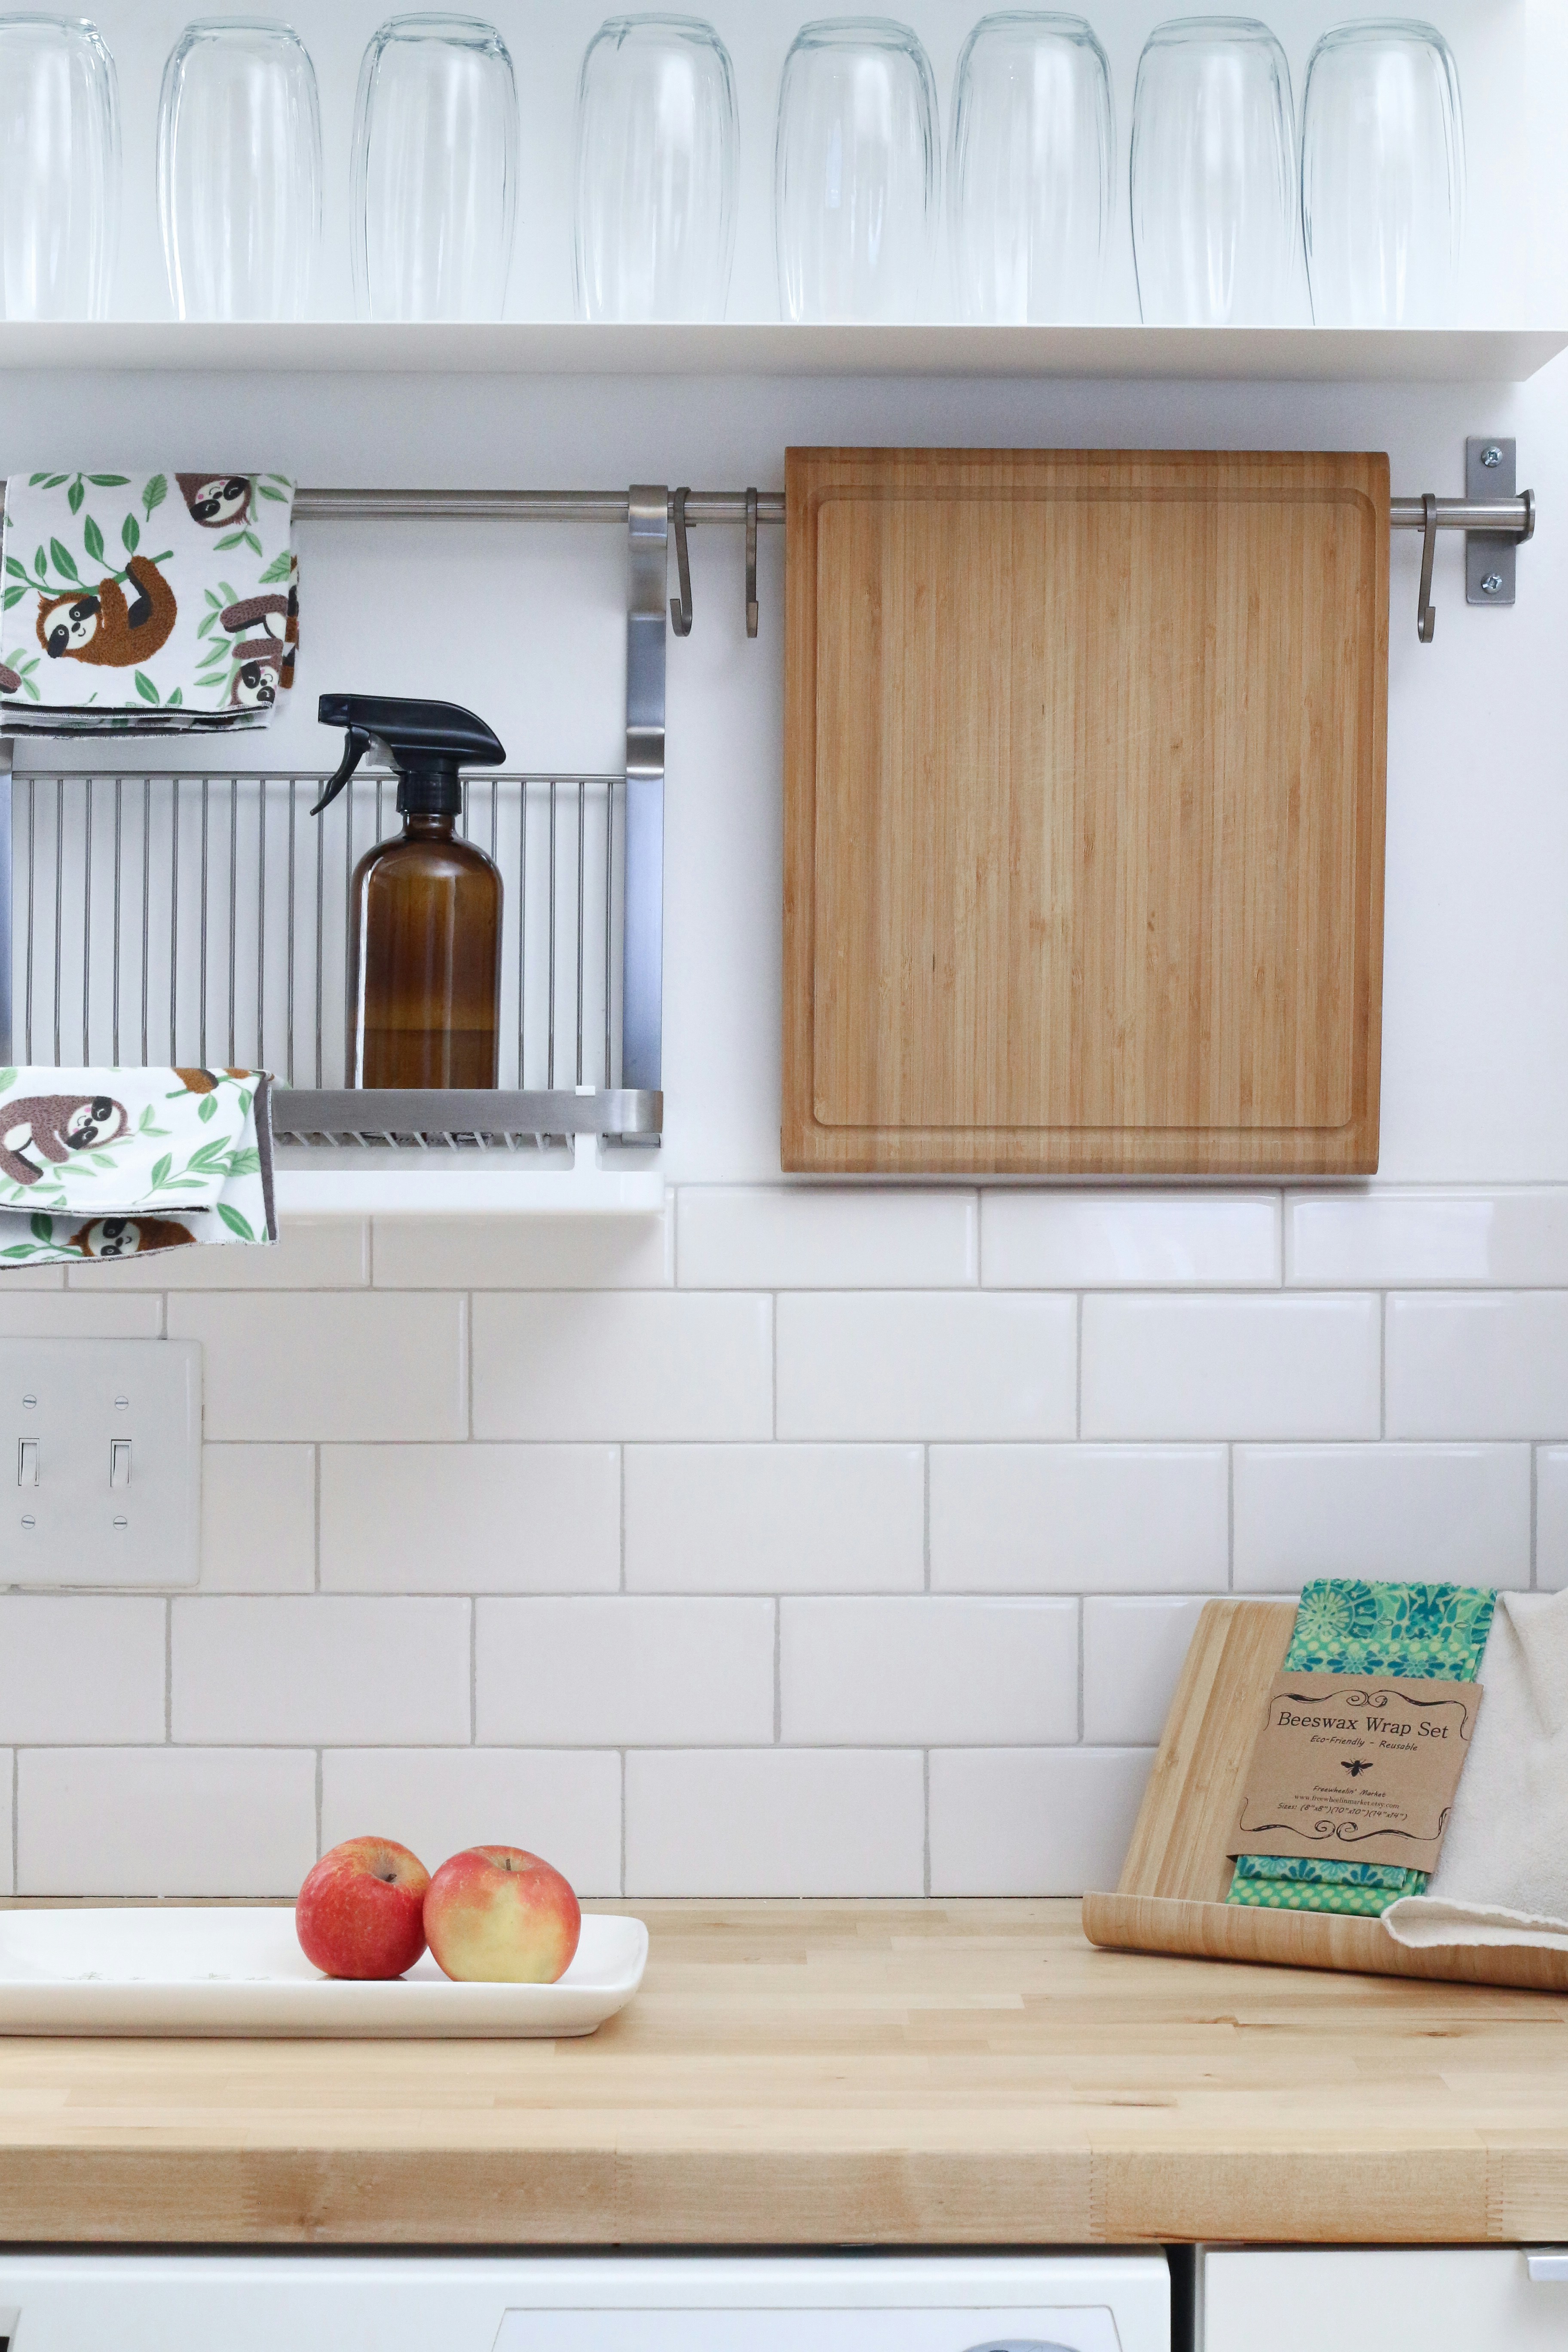  Are Wall Panels Safe For food?